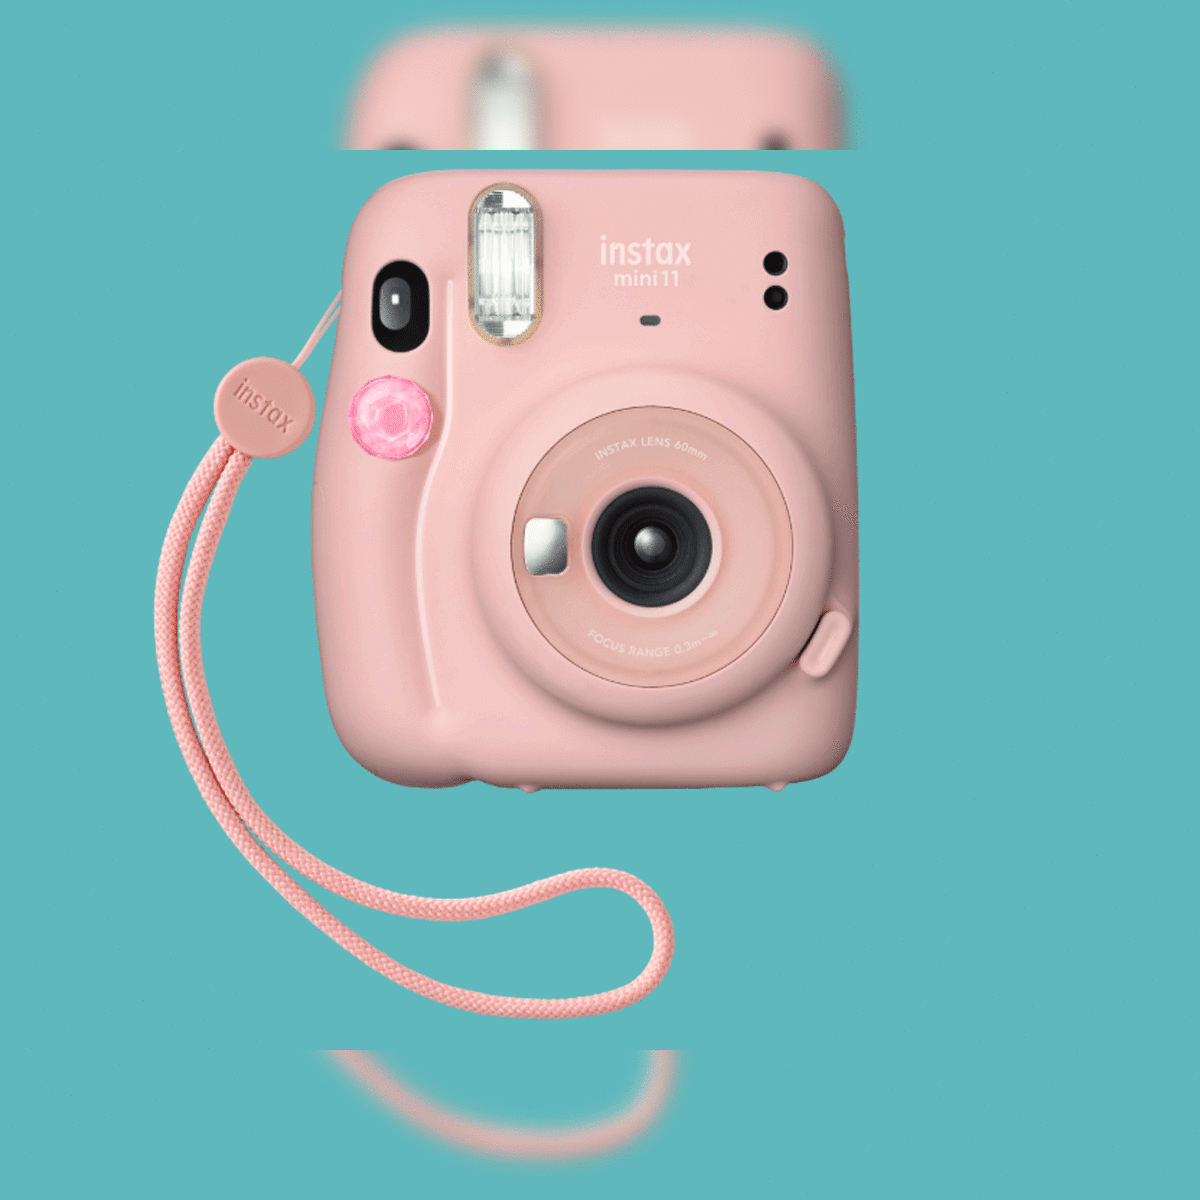 Fujifilm Instax Mini 11 review: Easy to use, delivers a decent output